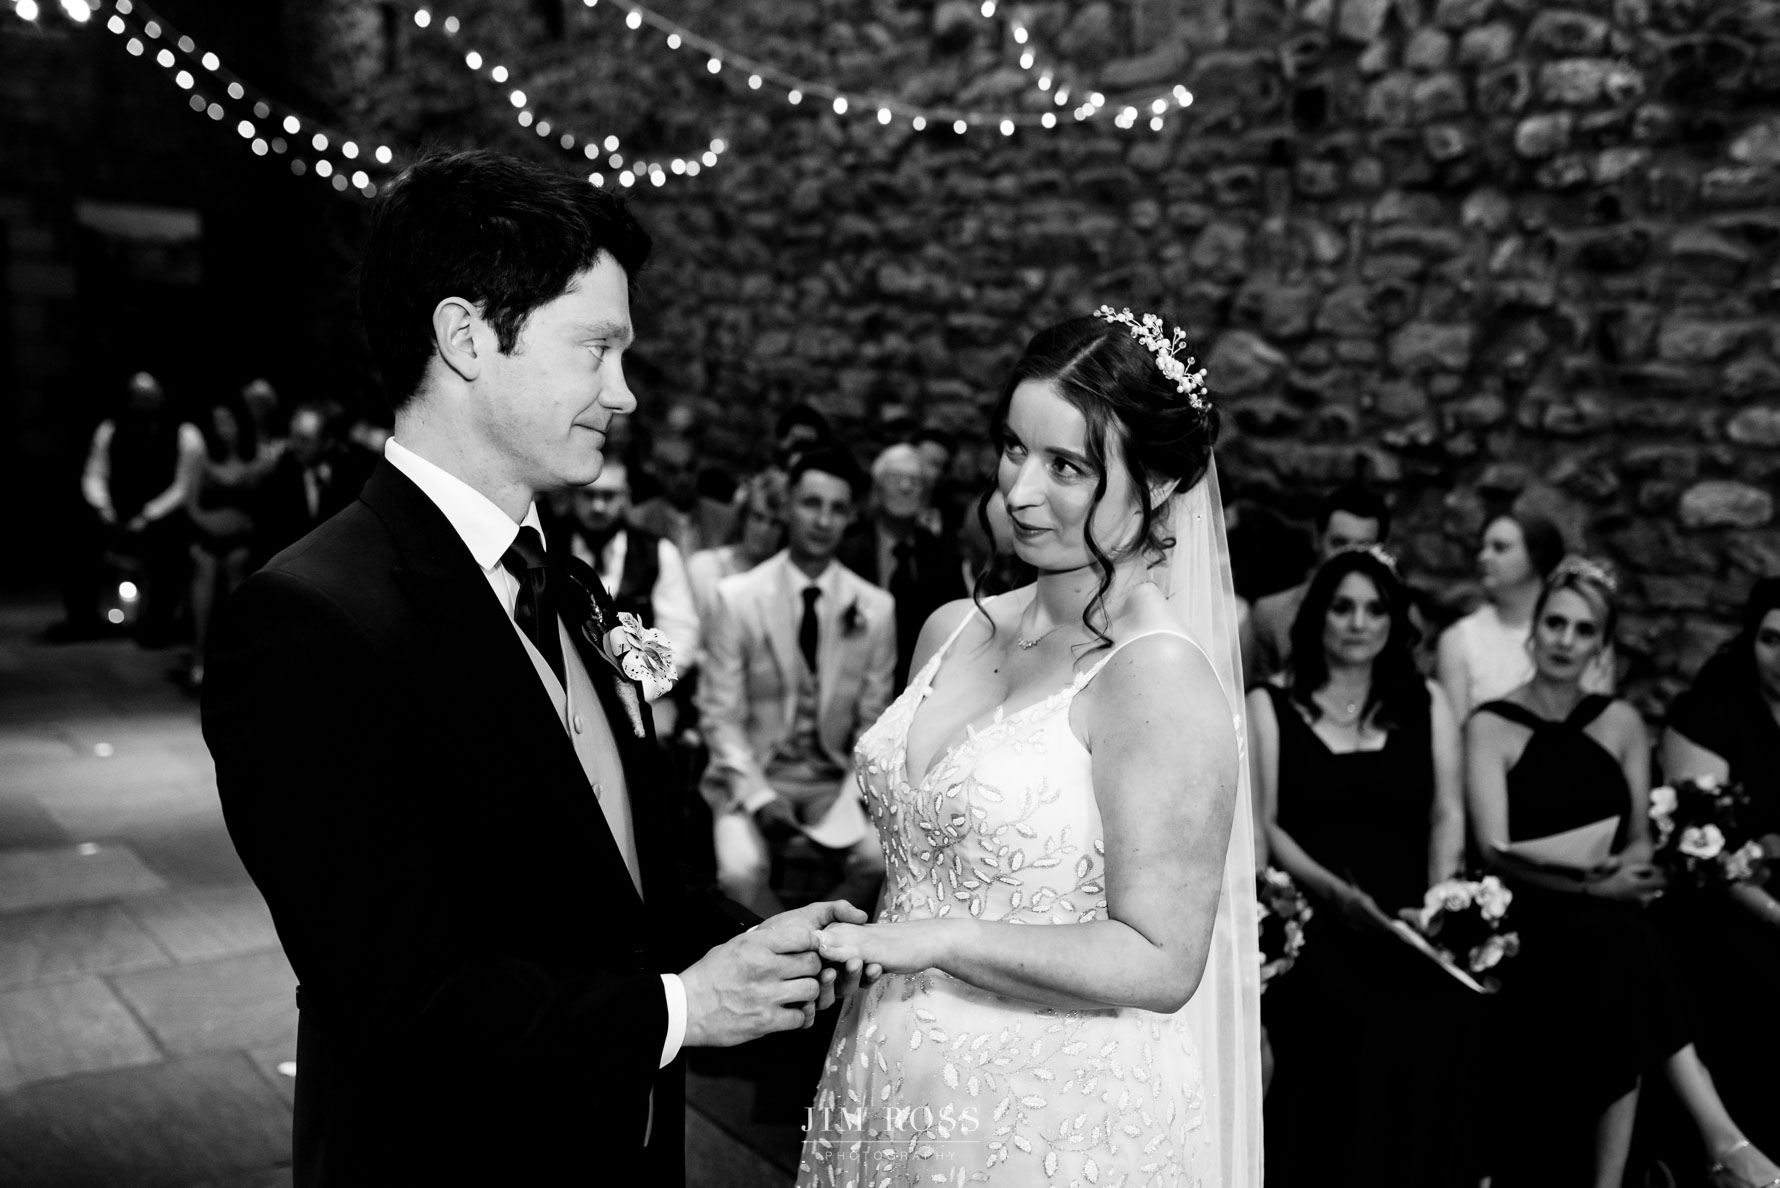 coy look from bride to groom during ring exchange